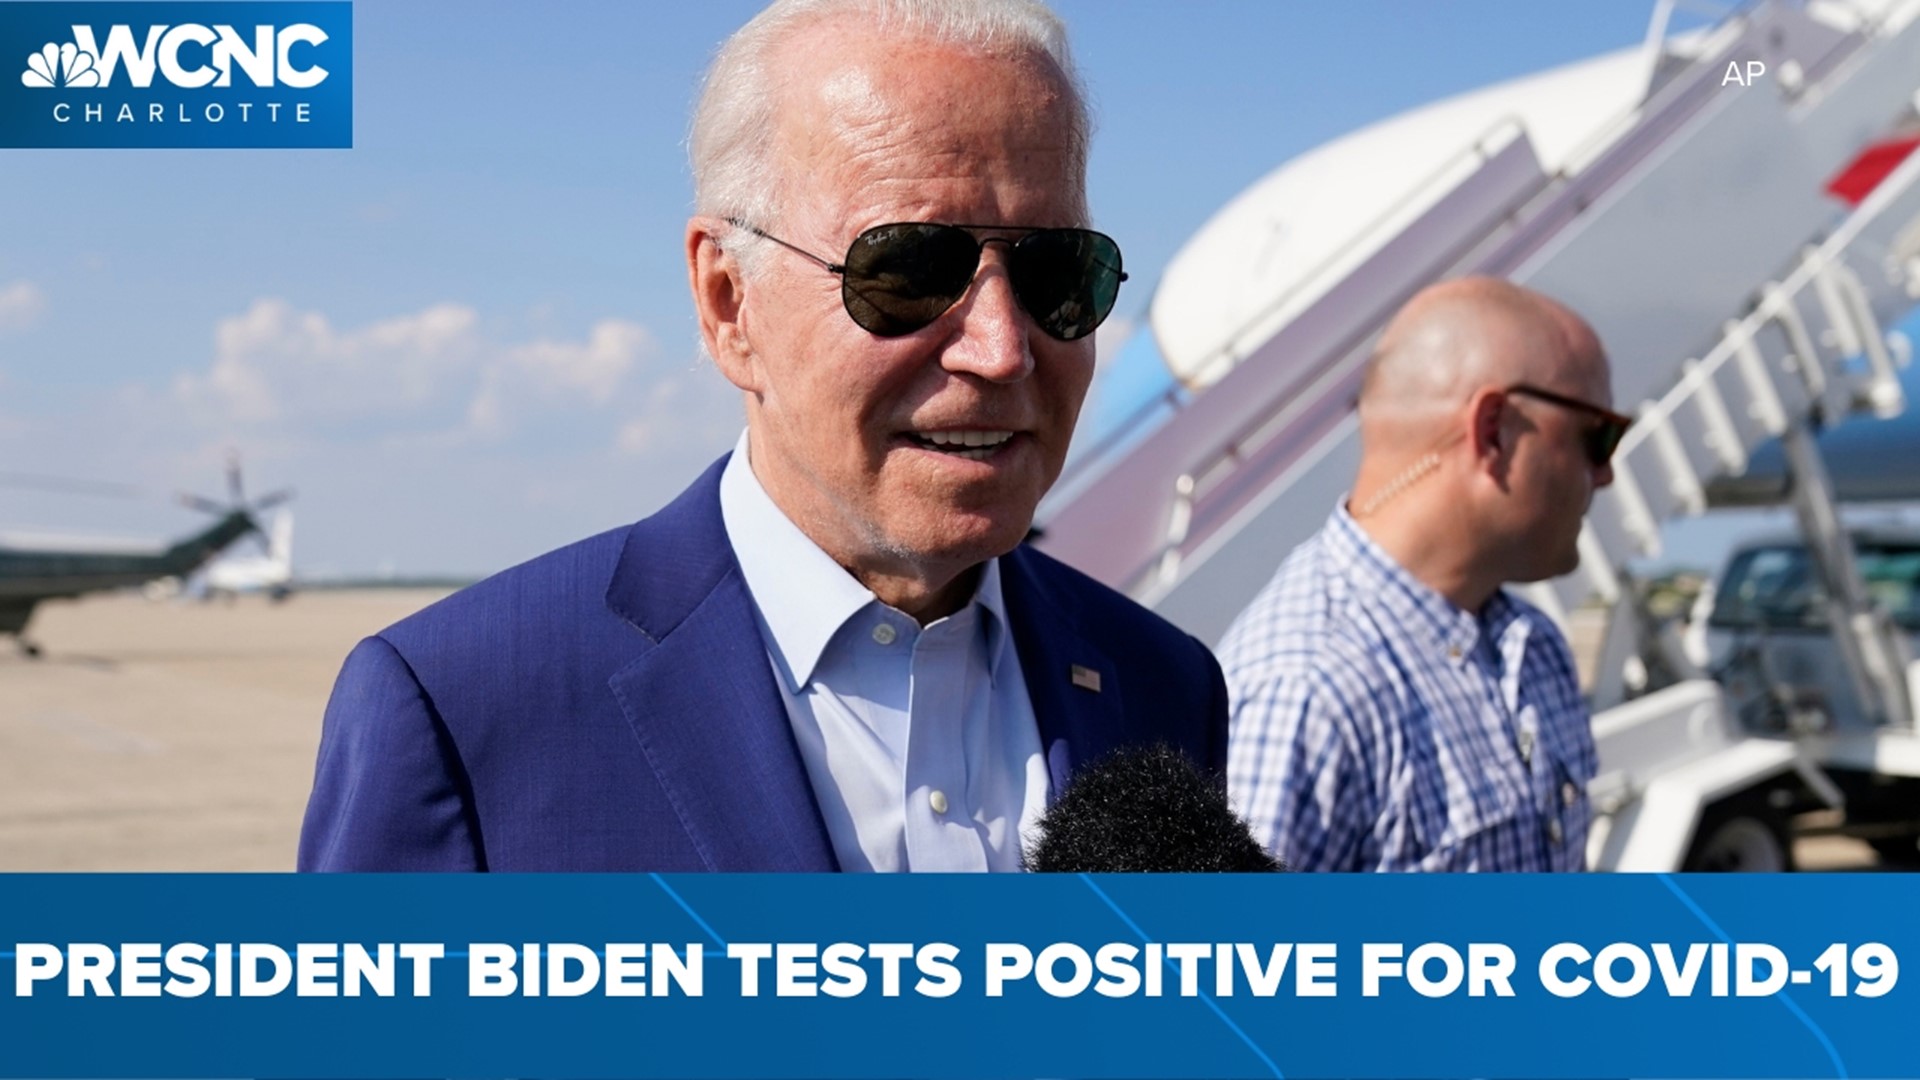 President Biden is experiencing "very mild" COVID-19 symptoms and has begun taking Paxlovid, an antiviral drug designed to reduce the severity of the disease.